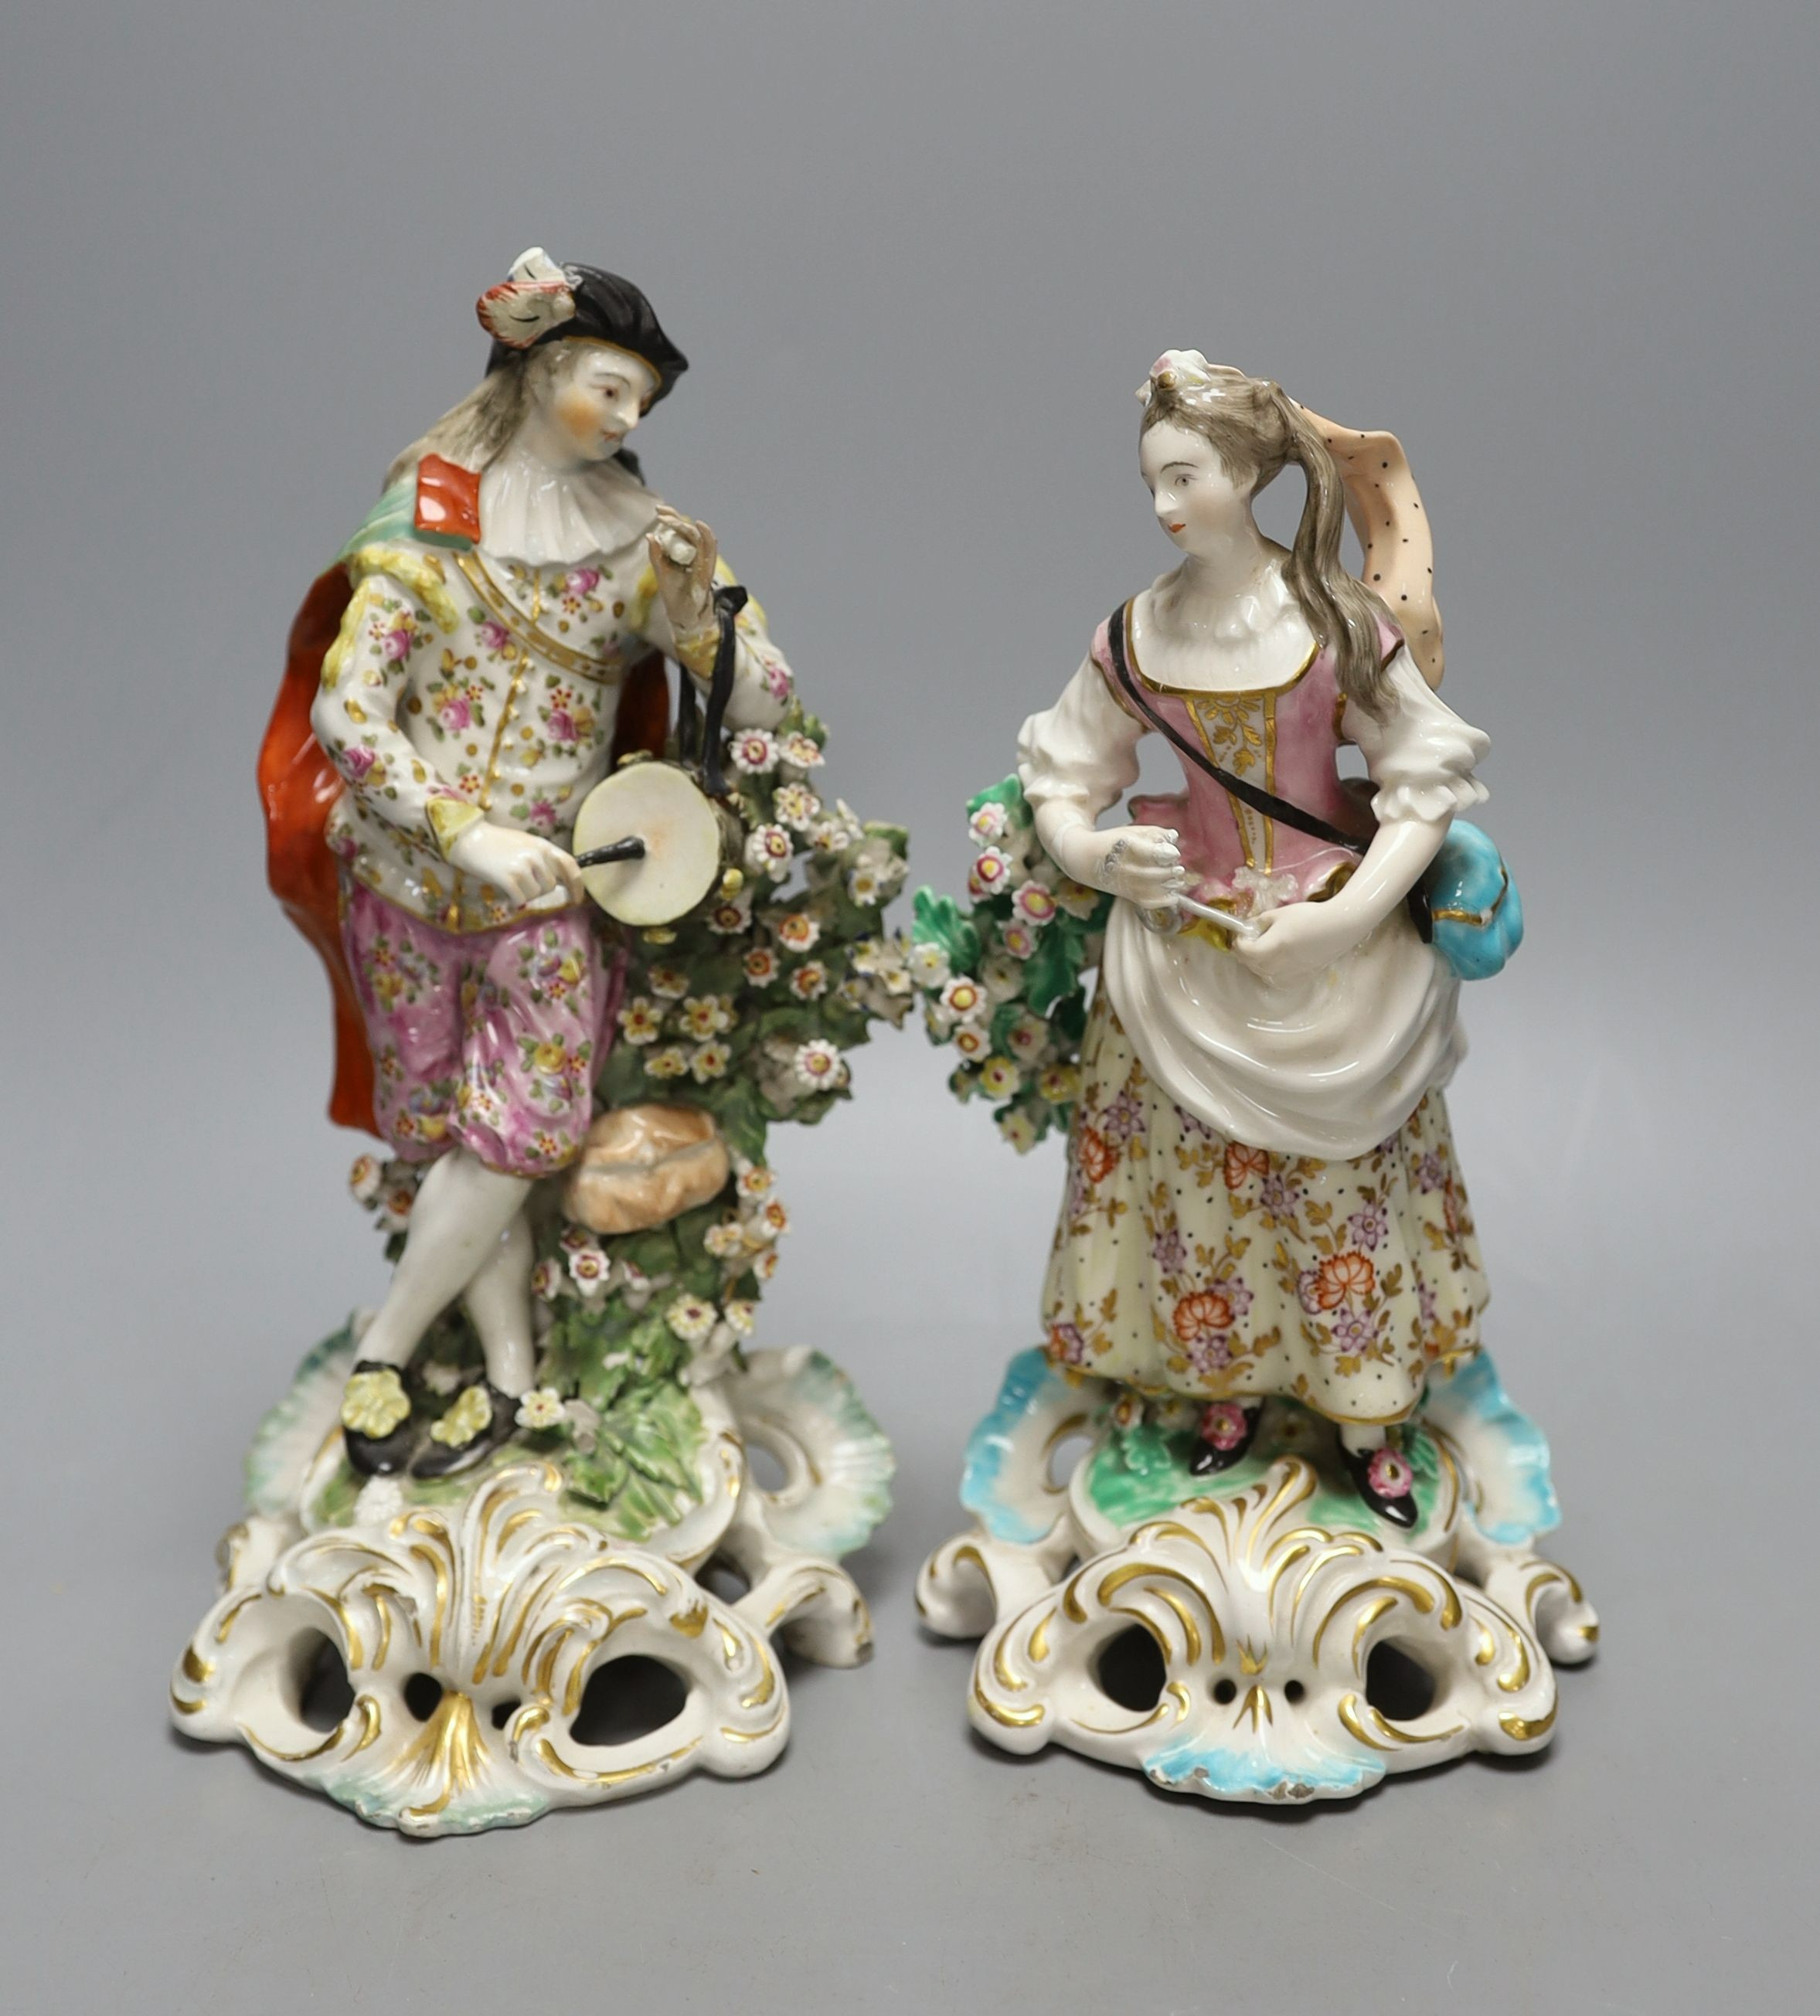 A matched pair of Derby figures, c.1770, the Female figure with incised number ‘No 311. 773’. Tallest 23cm